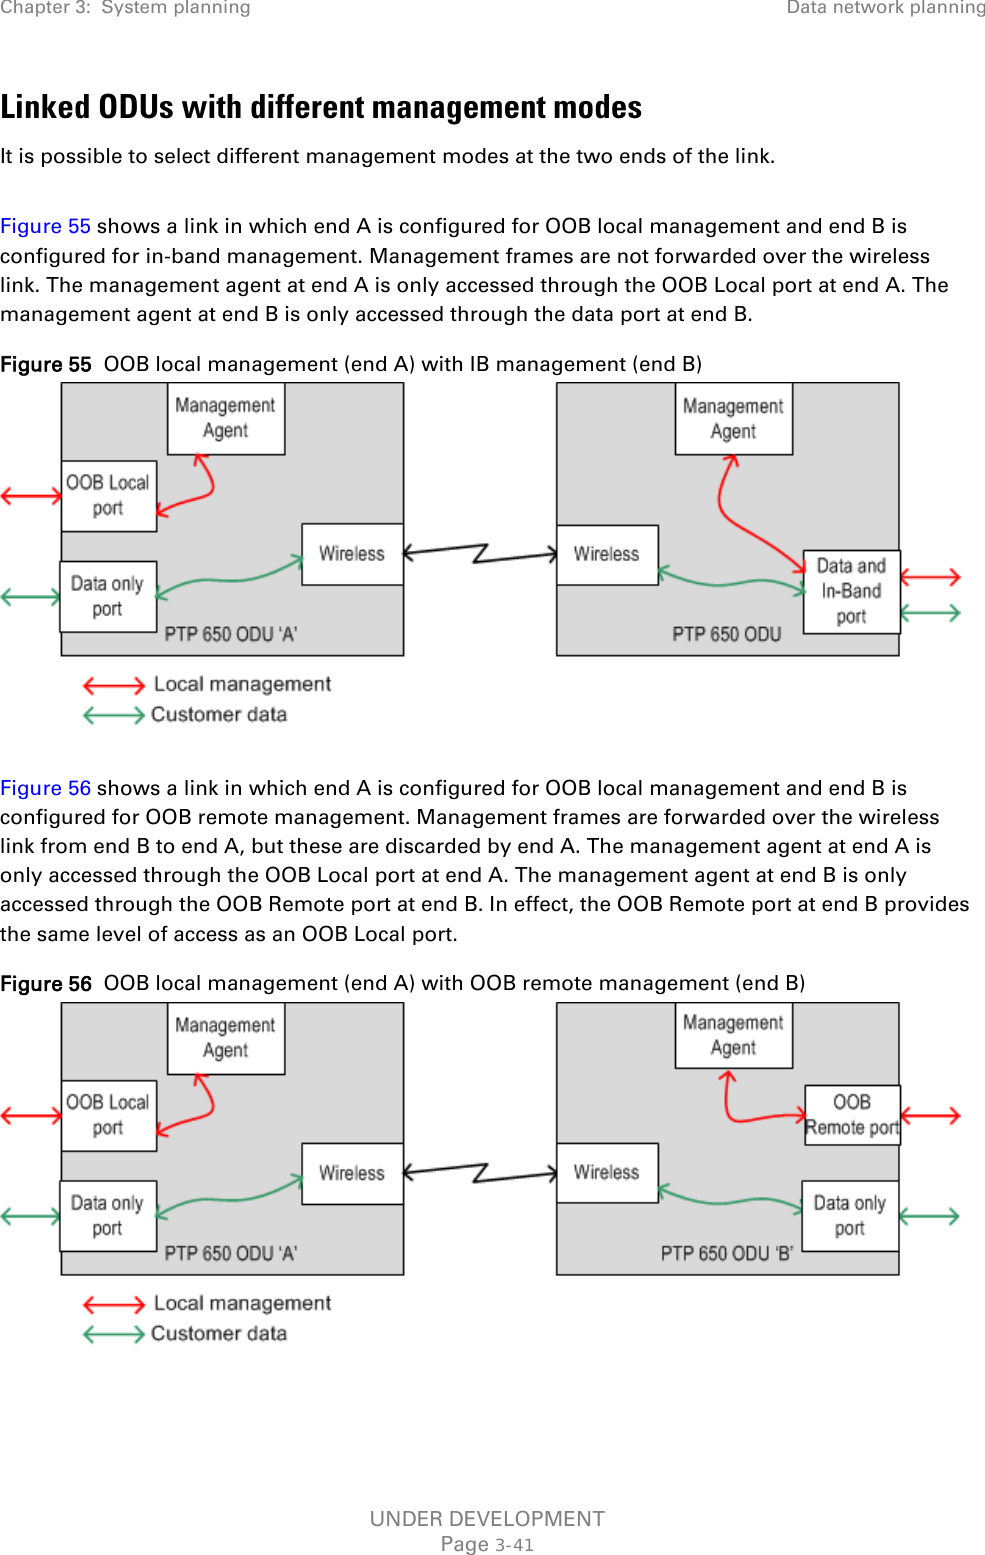 Chapter 3:  System planning Data network planning  Linked ODUs with different management modes It is possible to select different management modes at the two ends of the link.  Figure 55 shows a link in which end A is configured for OOB local management and end B is configured for in-band management. Management frames are not forwarded over the wireless link. The management agent at end A is only accessed through the OOB Local port at end A. The management agent at end B is only accessed through the data port at end B. Figure 55  OOB local management (end A) with IB management (end B)   Figure 56 shows a link in which end A is configured for OOB local management and end B is configured for OOB remote management. Management frames are forwarded over the wireless link from end B to end A, but these are discarded by end A. The management agent at end A is only accessed through the OOB Local port at end A. The management agent at end B is only accessed through the OOB Remote port at end B. In effect, the OOB Remote port at end B provides the same level of access as an OOB Local port. Figure 56  OOB local management (end A) with OOB remote management (end B)   UNDER DEVELOPMENT Page 3-41 